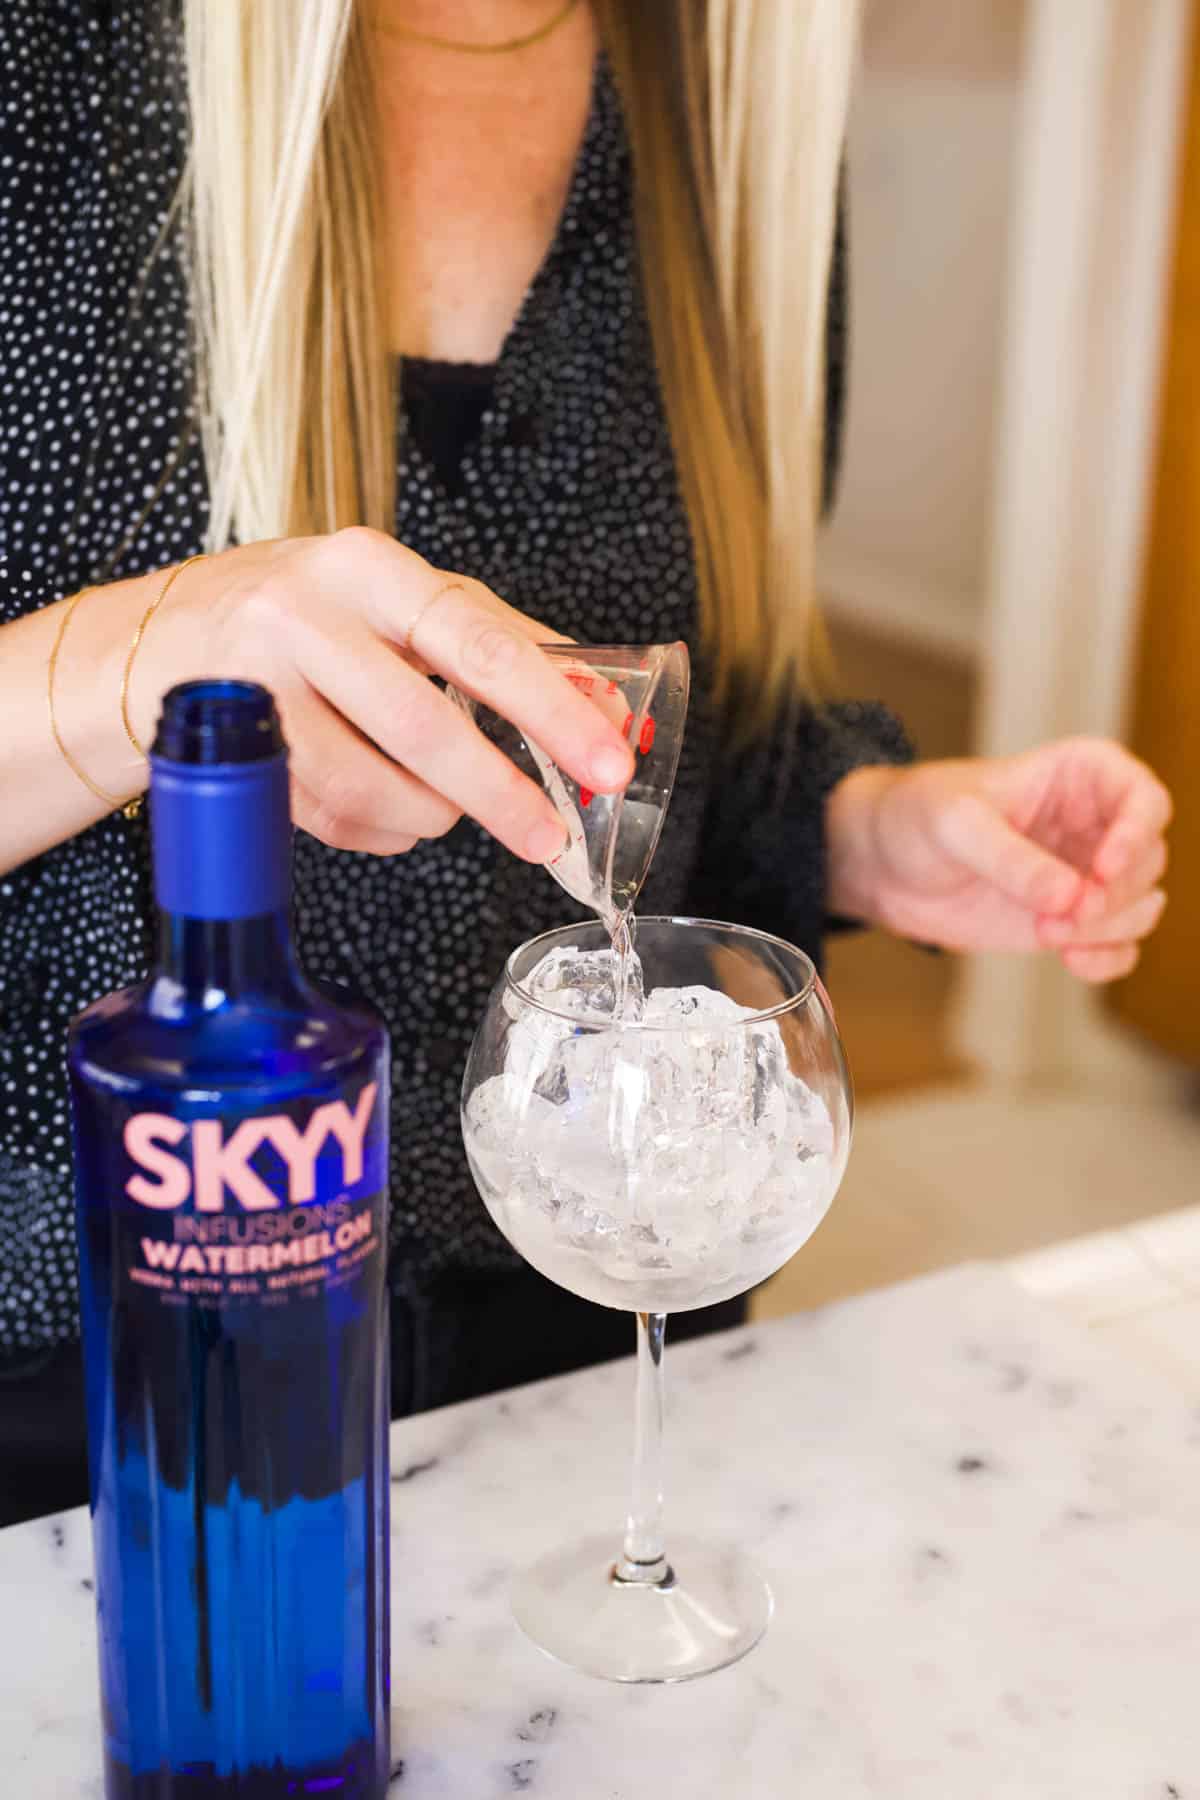 Adding Skyy Watermelon vodka to a wine glass filled with ice.